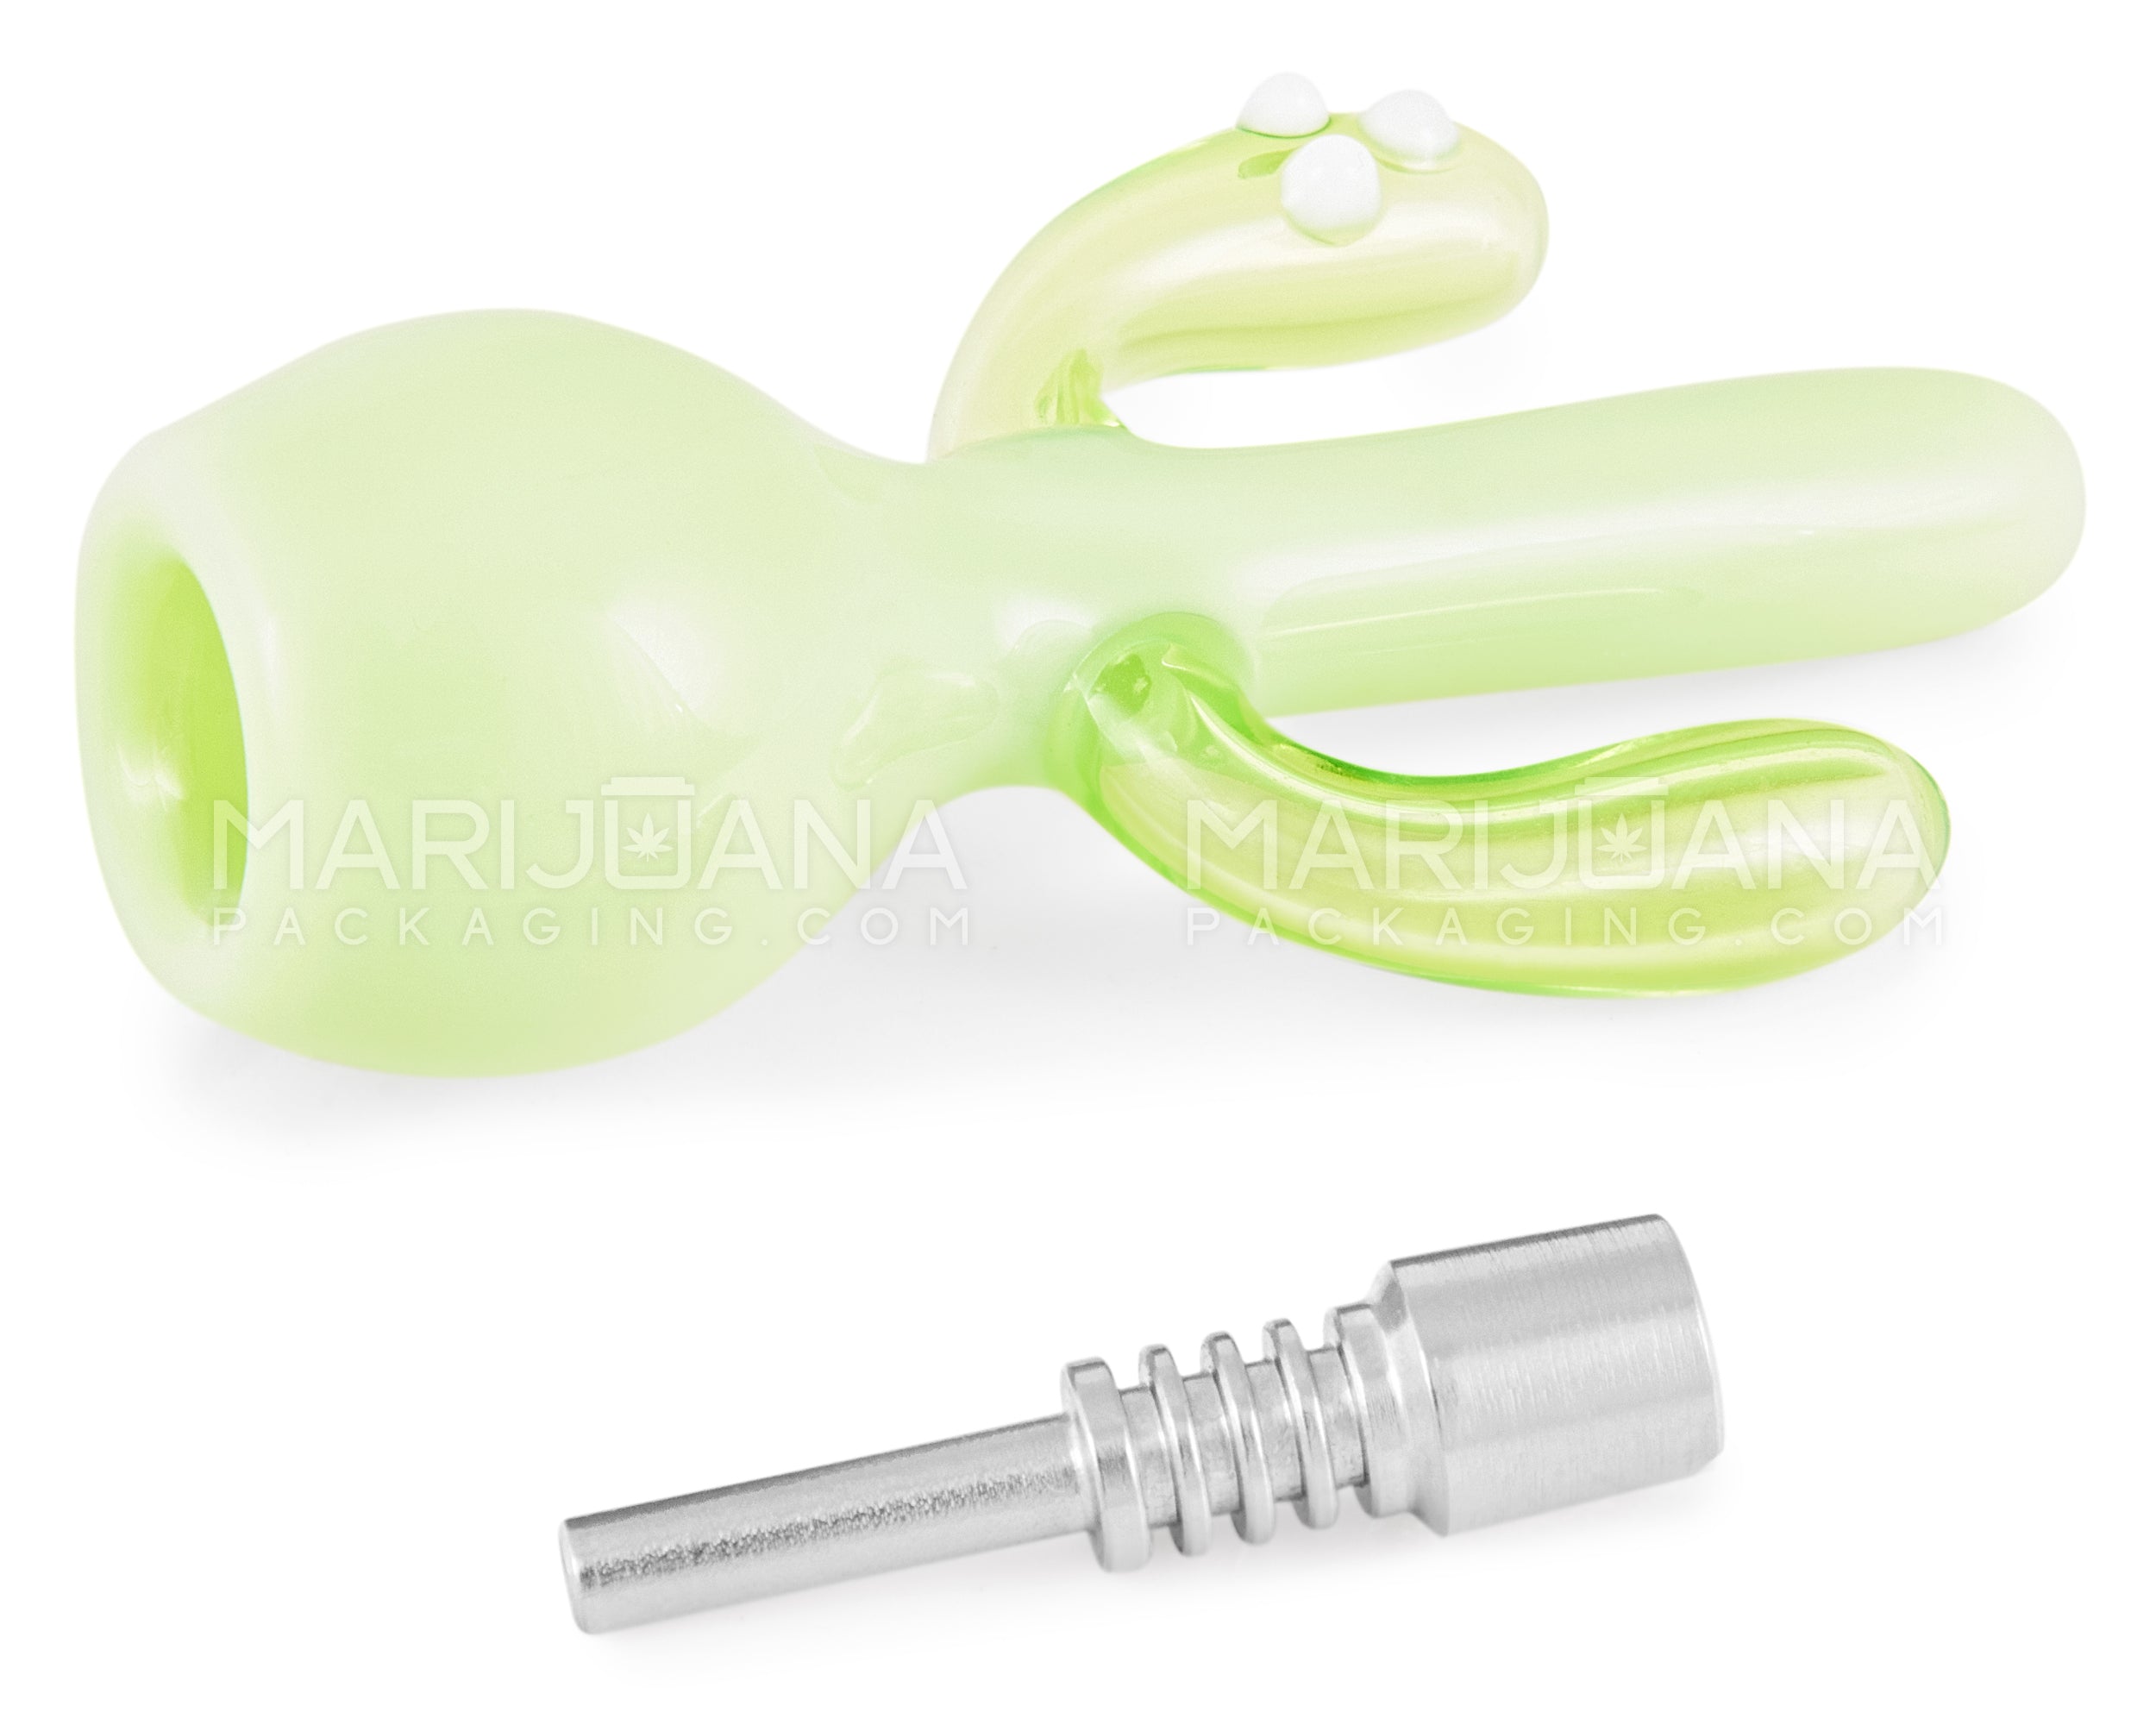 Cactus Nectar Collector Dab Pipe w/ Titanium Tip | 6in Long - 10mm Attachment - Green - 2